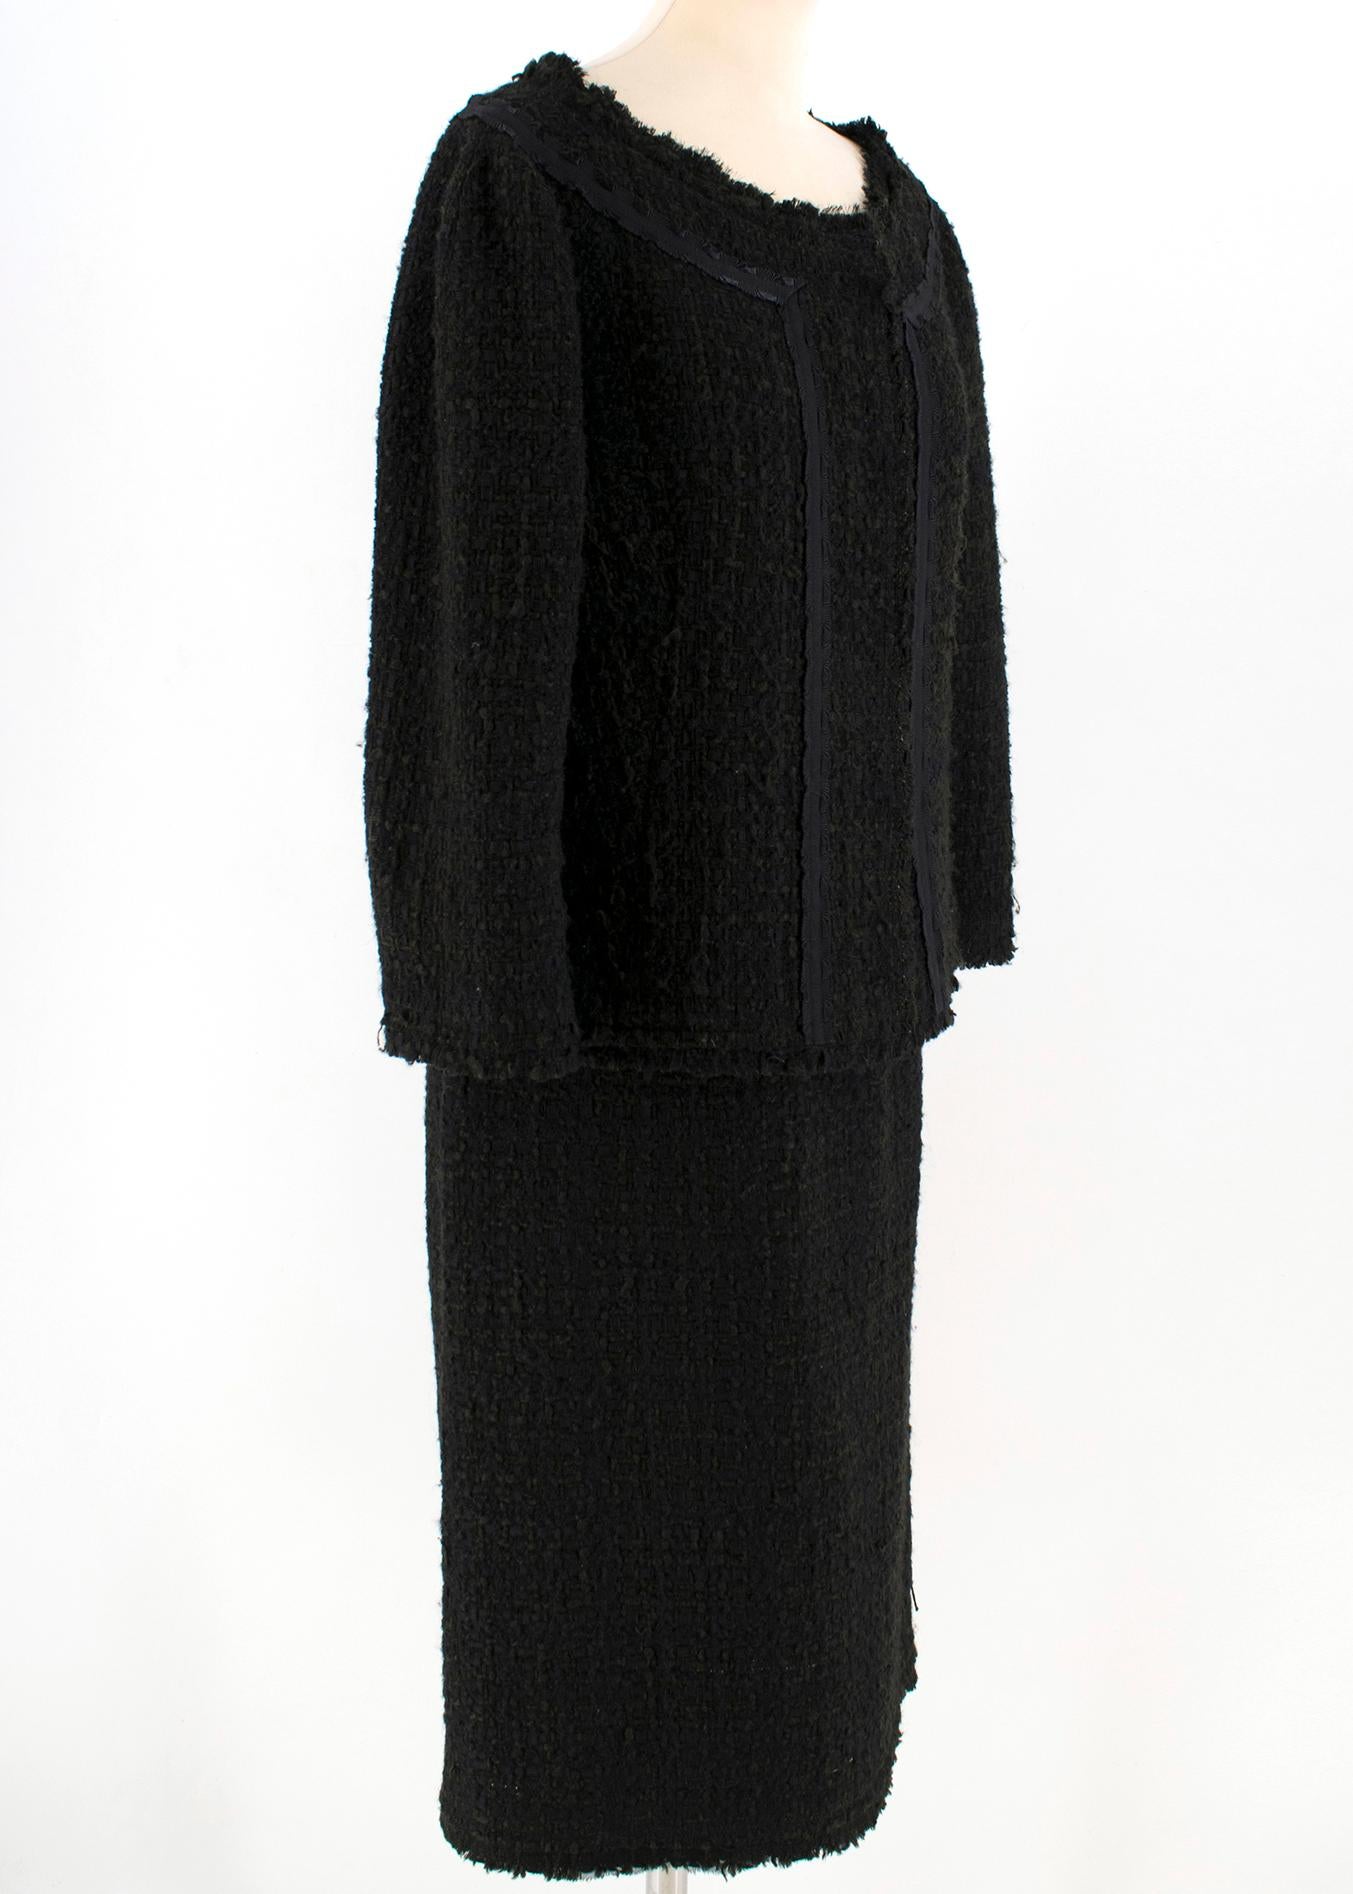 Alberta Ferretti Black Tweed Jacket & Skirt

- Black lining
- Scoop neck
- Jacket: Buttons closure at the front, skirt: zip closure at the back.

Please note, these items are pre-owned and may show some signs of storage, even when unworn and unused.